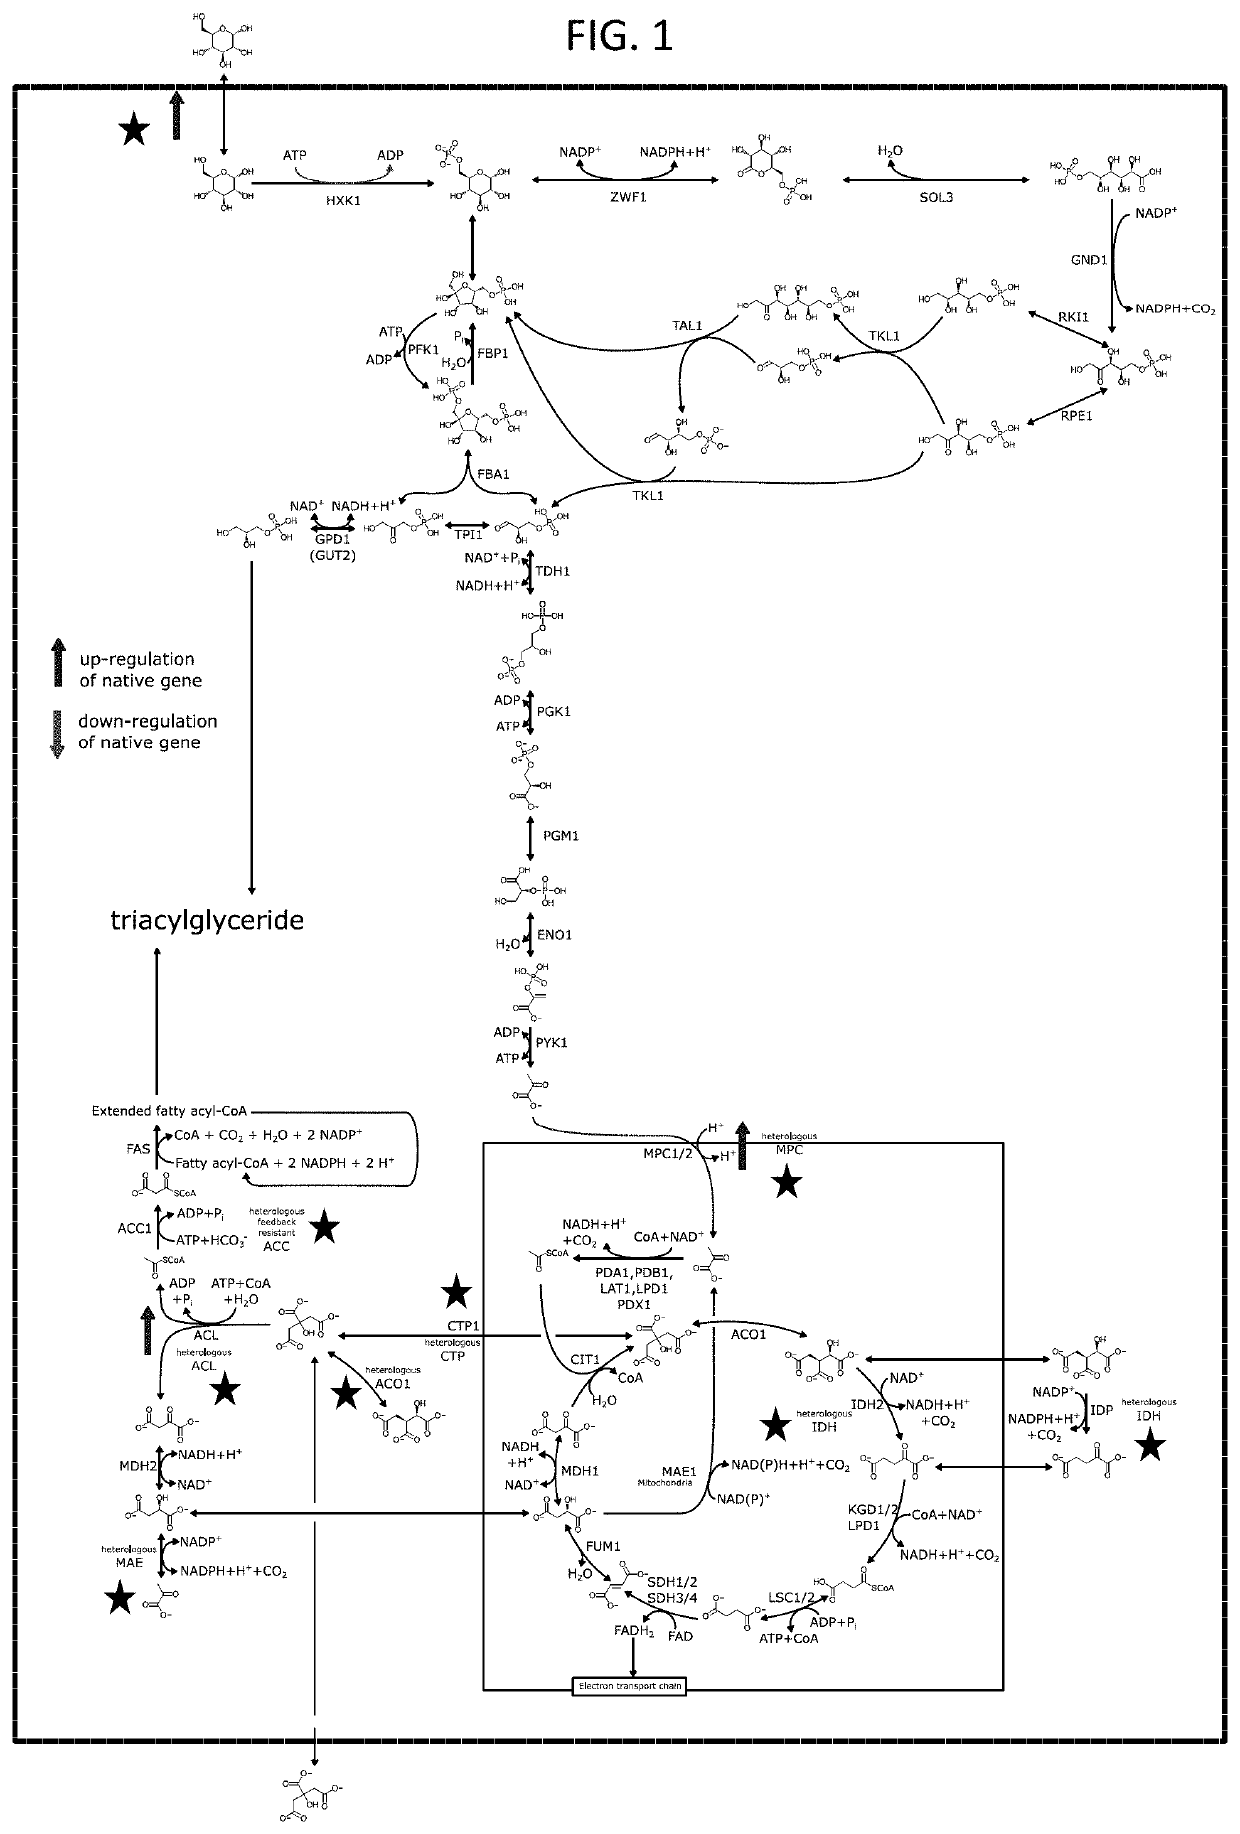 Multi-substrate metabolism for improving biomass and lipid production